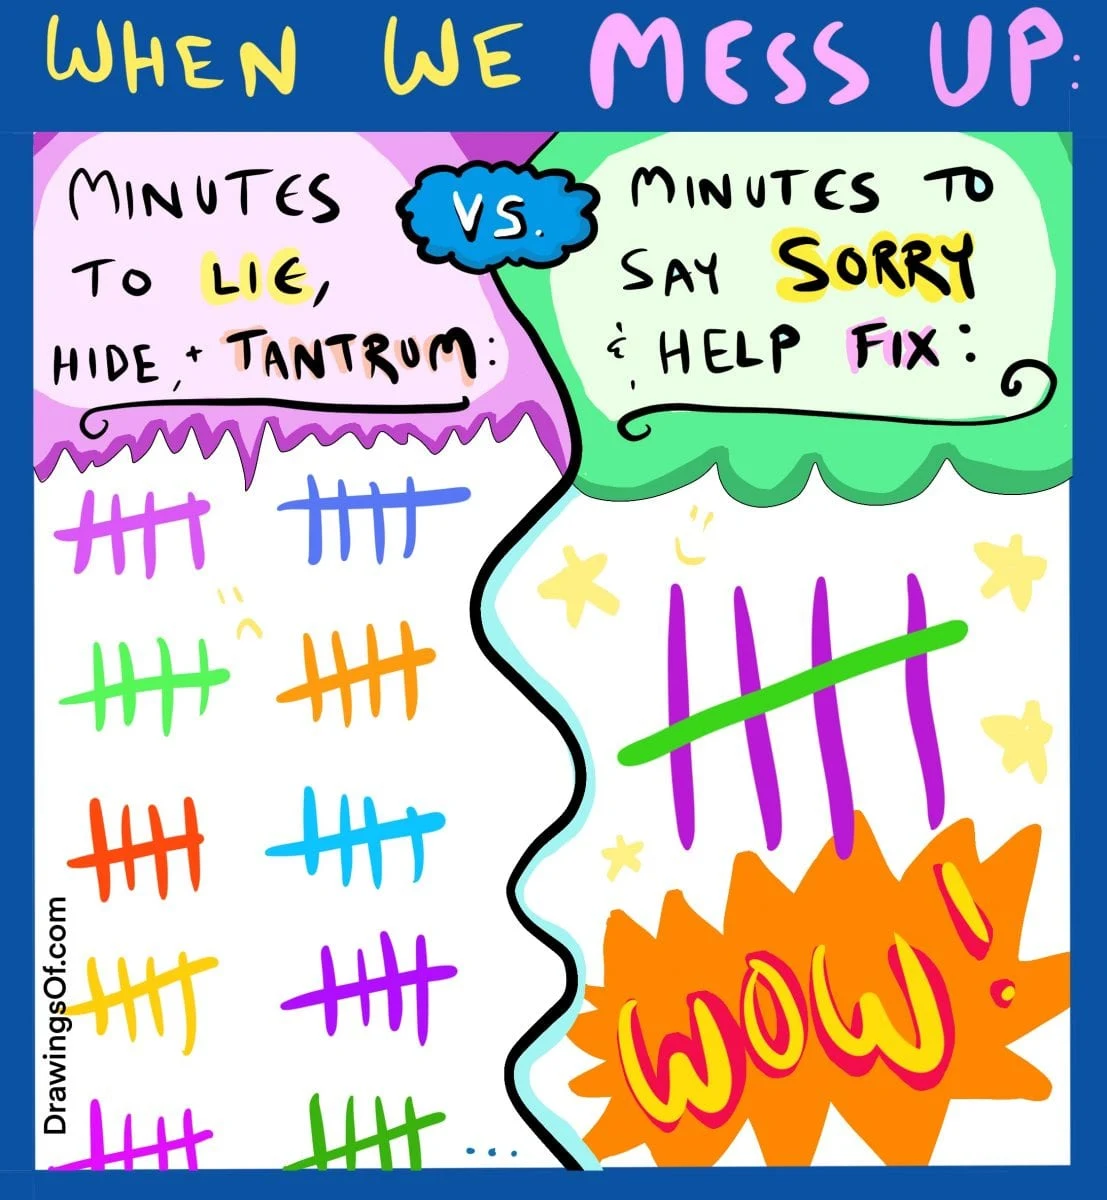 Chart of how long it takes a child to lie and hide and tantrum versus say sorry and help fix after messing up.